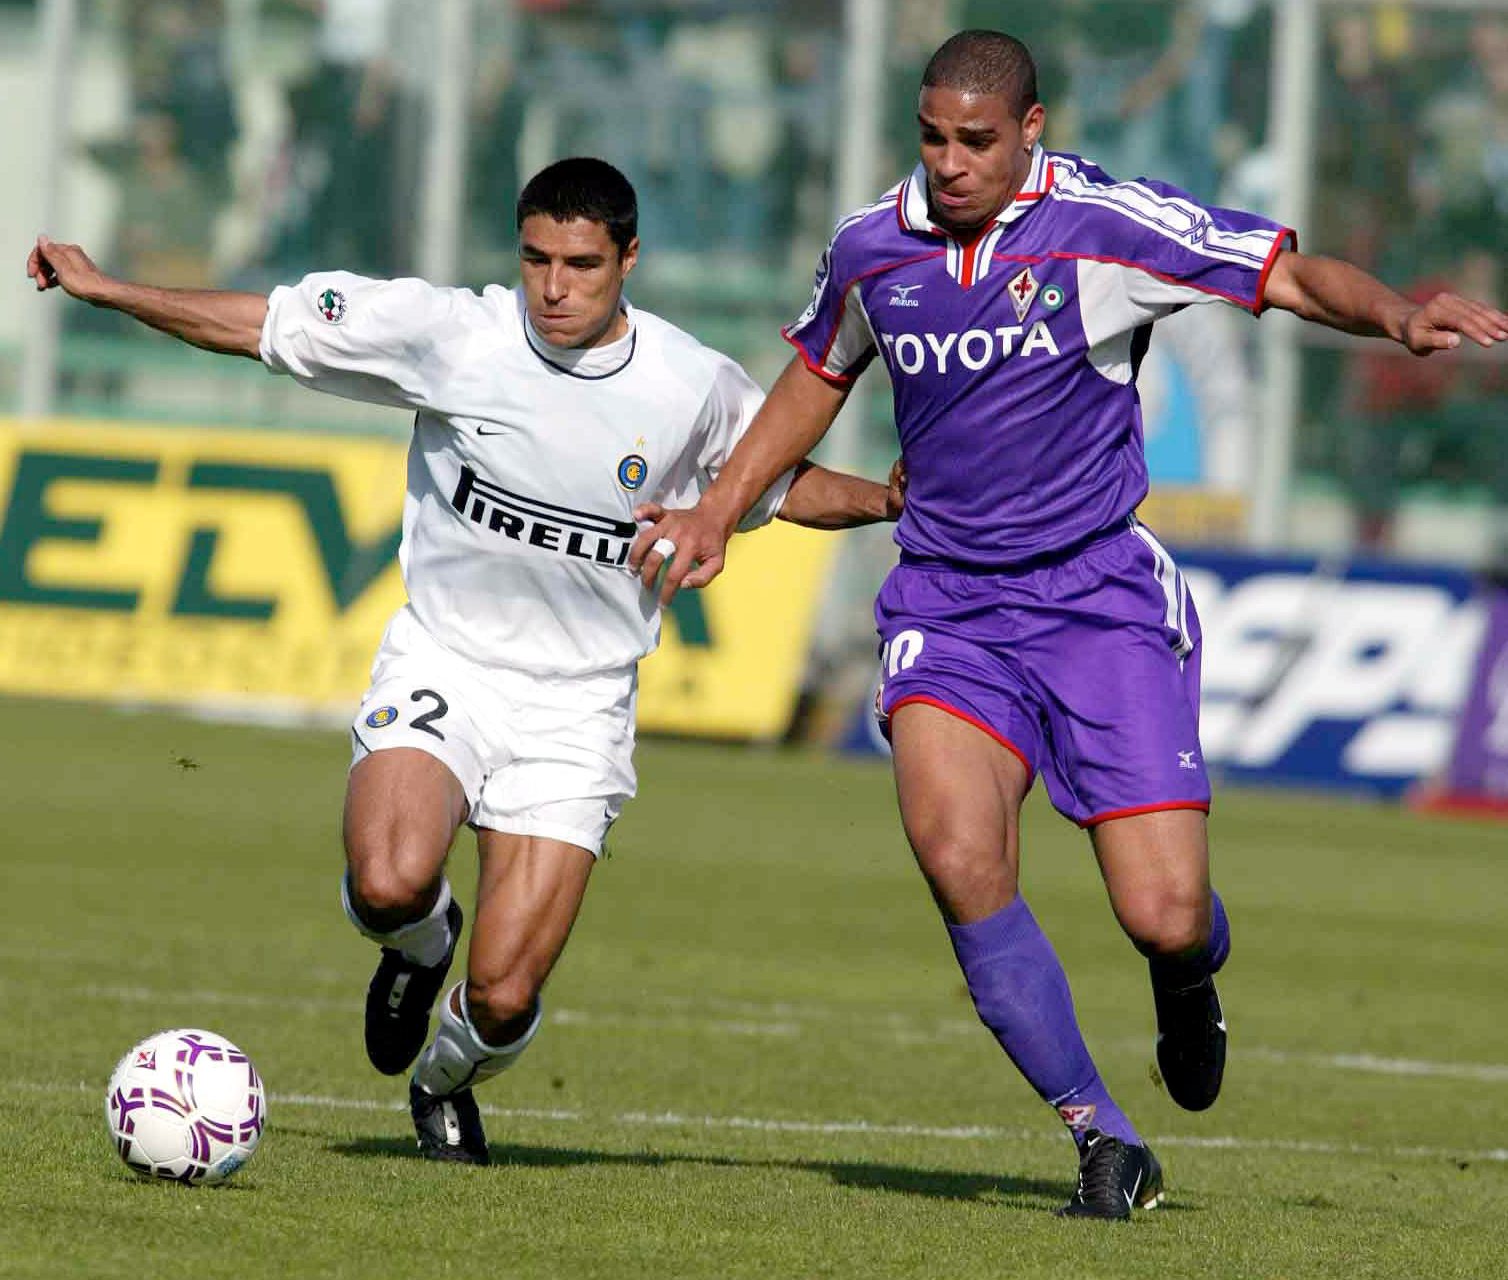 <p><span>He was quickly loaned to Fiorentina but failed to save the club from relegation in the 2001–02 season, despite scoring 6 goals in 15 games. The following season, he was loaned to Parma and, there, finally exploded.</span></p>